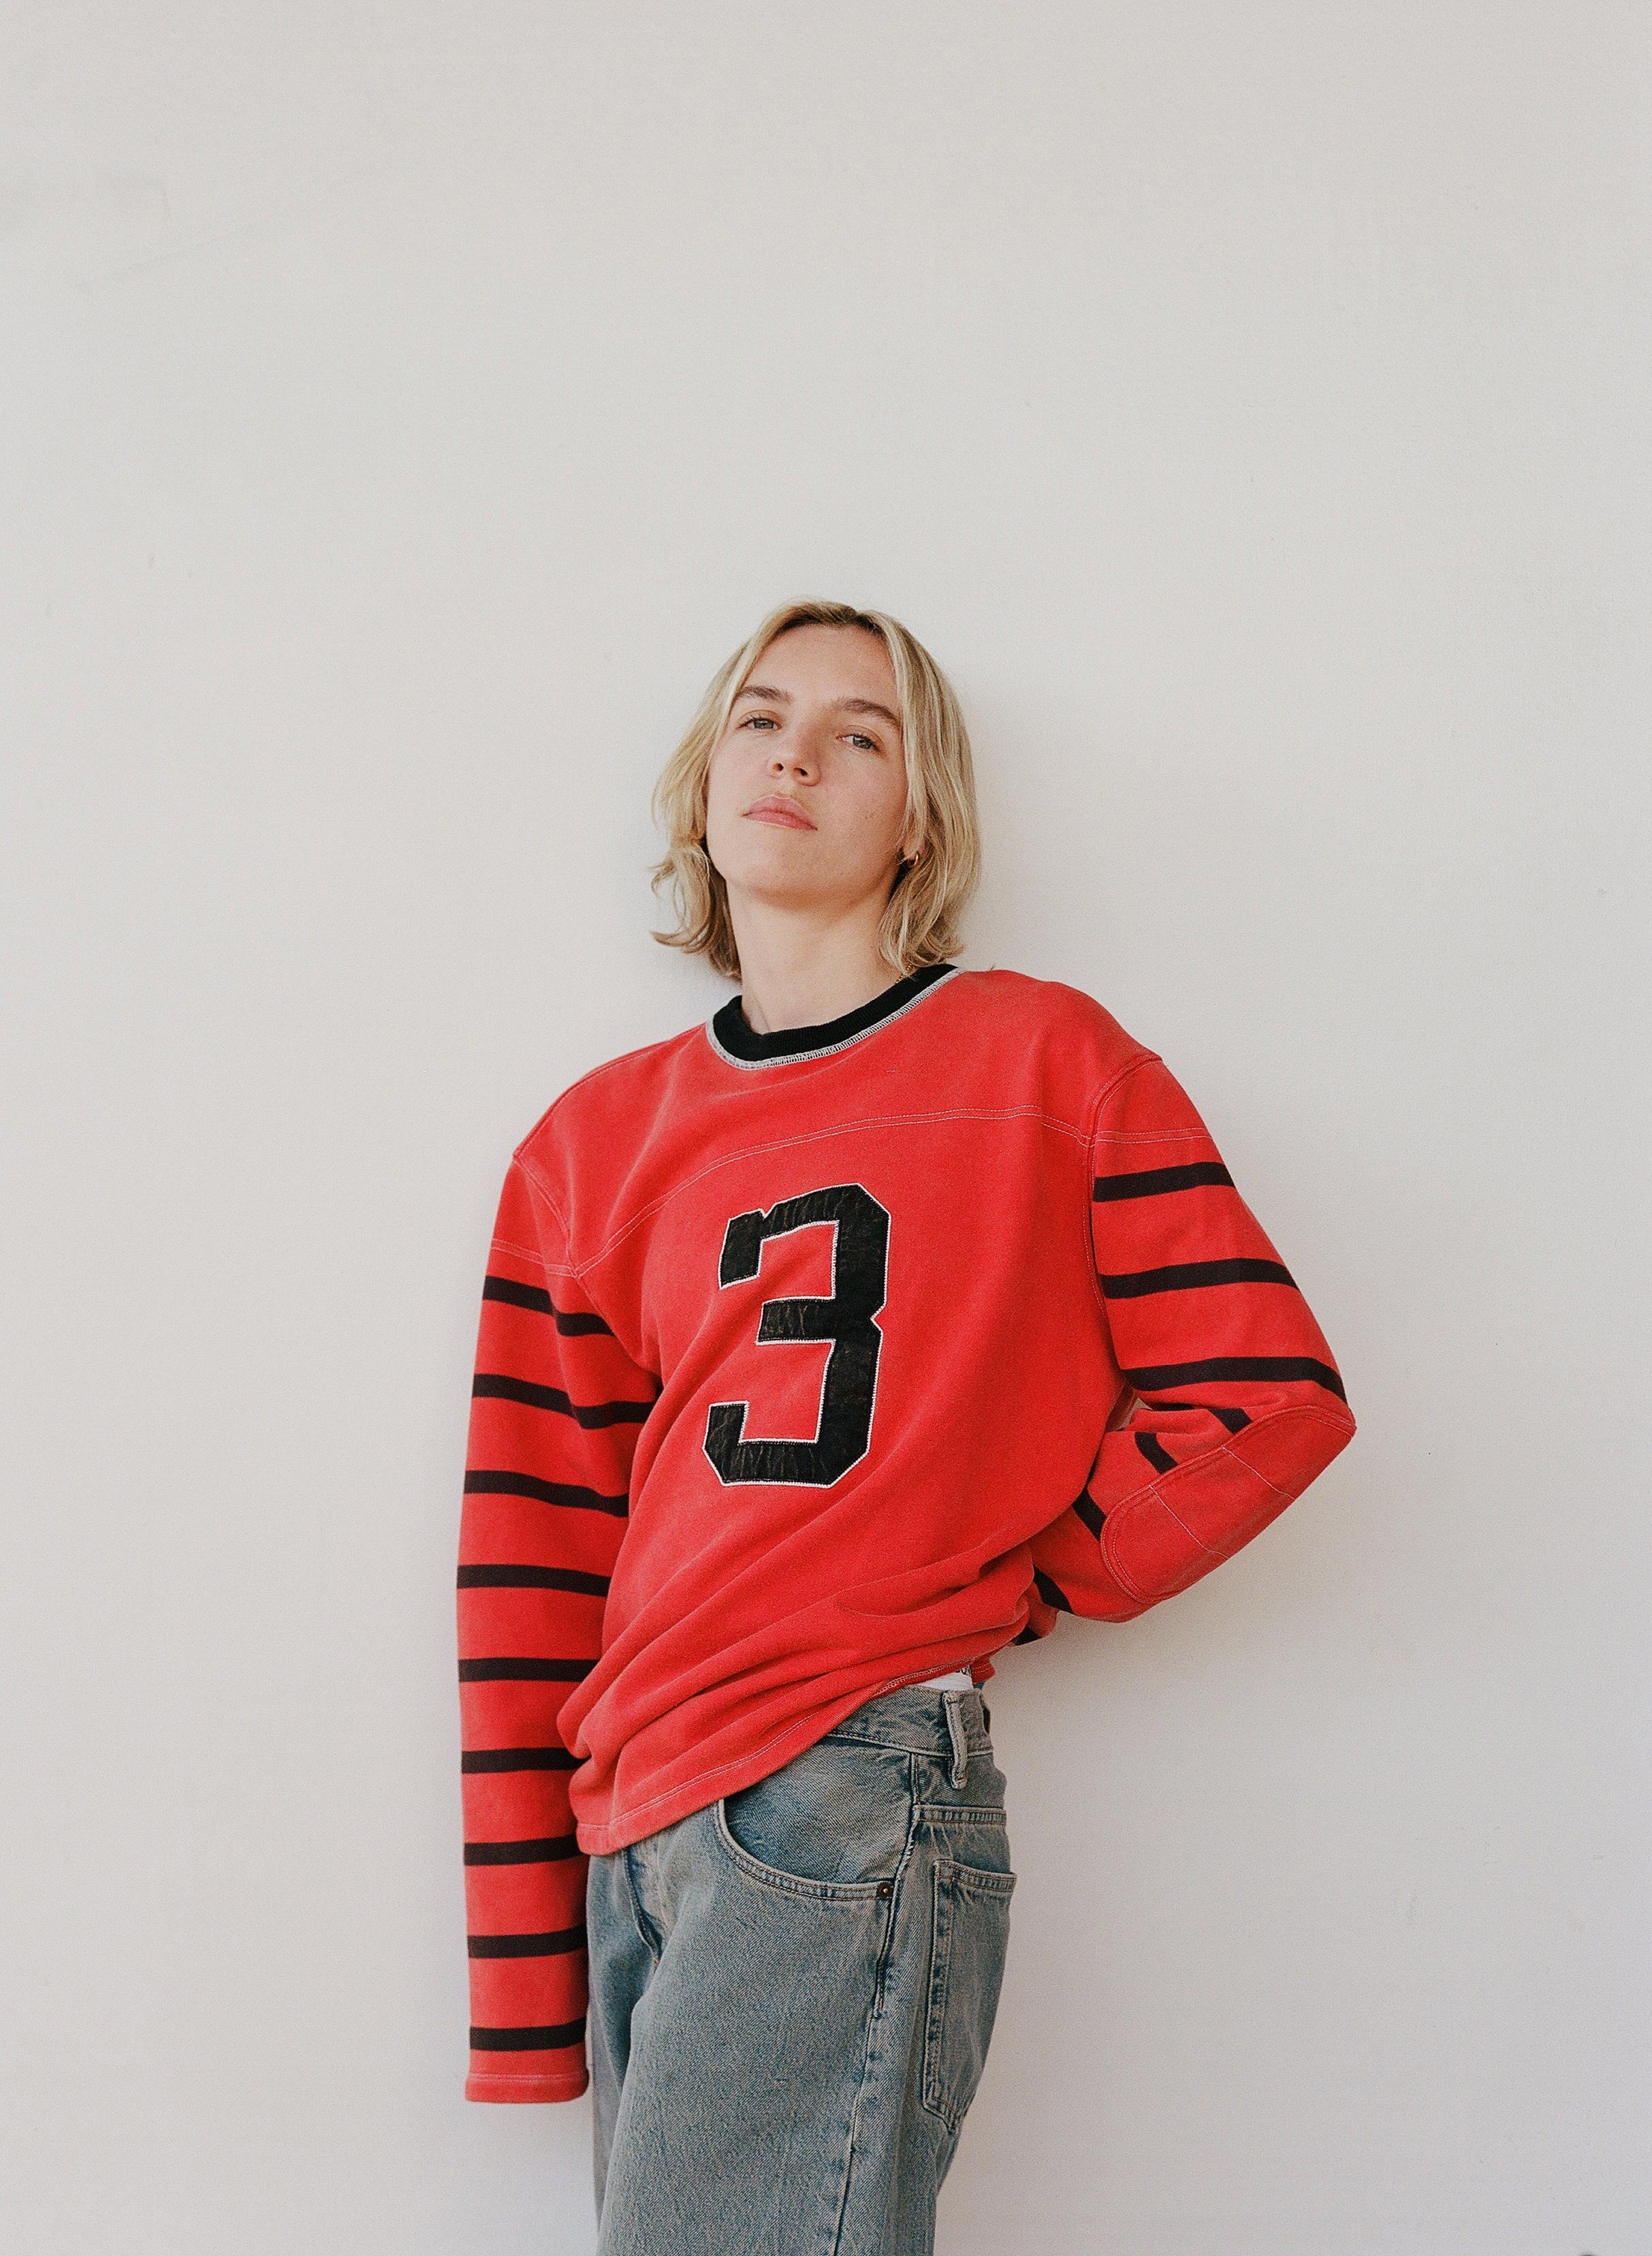 The Japanese House pre-sale code for real tickets in Salt Lake City